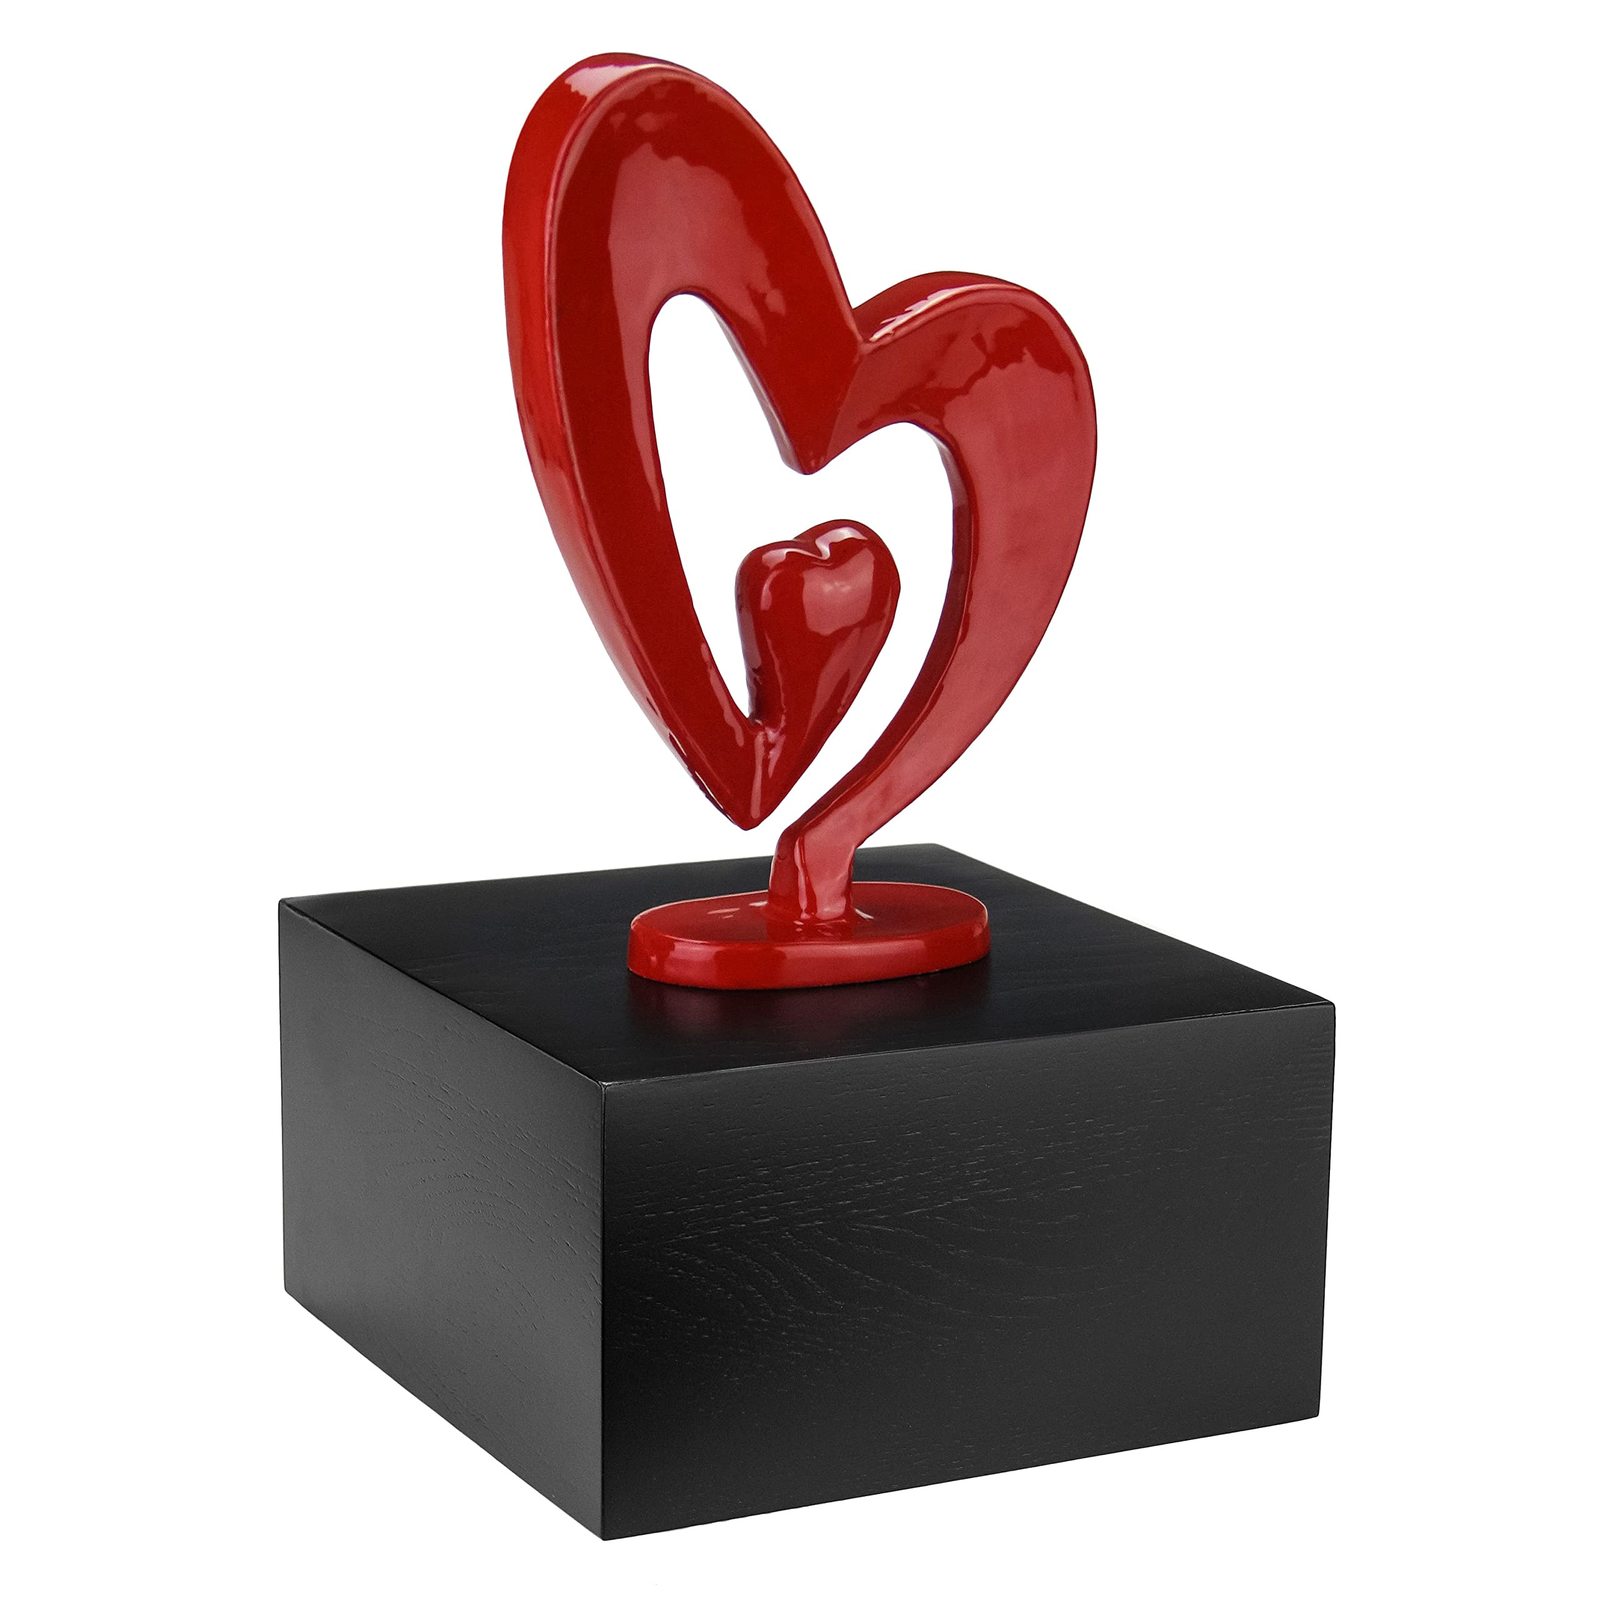 Remember Forever Red Heart - Sculpture Cremation Urn, Artistic Urn for Ashes (Me - $168.30 - $237.60